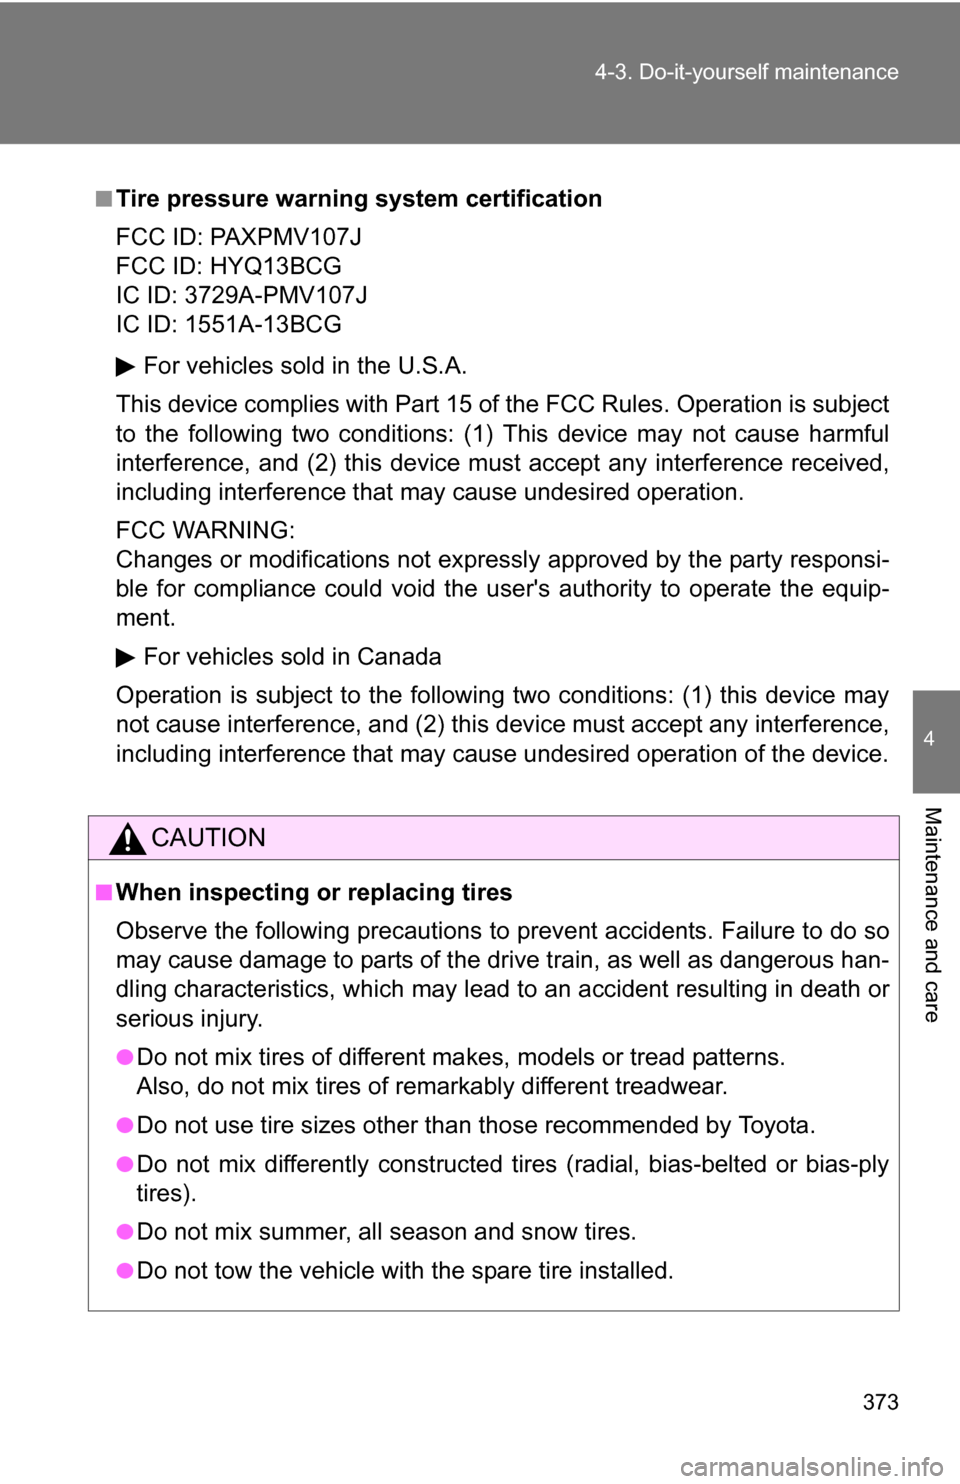 TOYOTA RAV4 2009 XA30 / 3.G Owners Manual 373
4-3. Do-it-yourself maintenance
4
Maintenance and care
■Tire pressure warning system certification
FCC ID: PAXPMV107J
FCC ID: HYQ13BCG
IC ID: 3729A-PMV107J
IC ID: 1551A-13BCG
For vehicles sold i